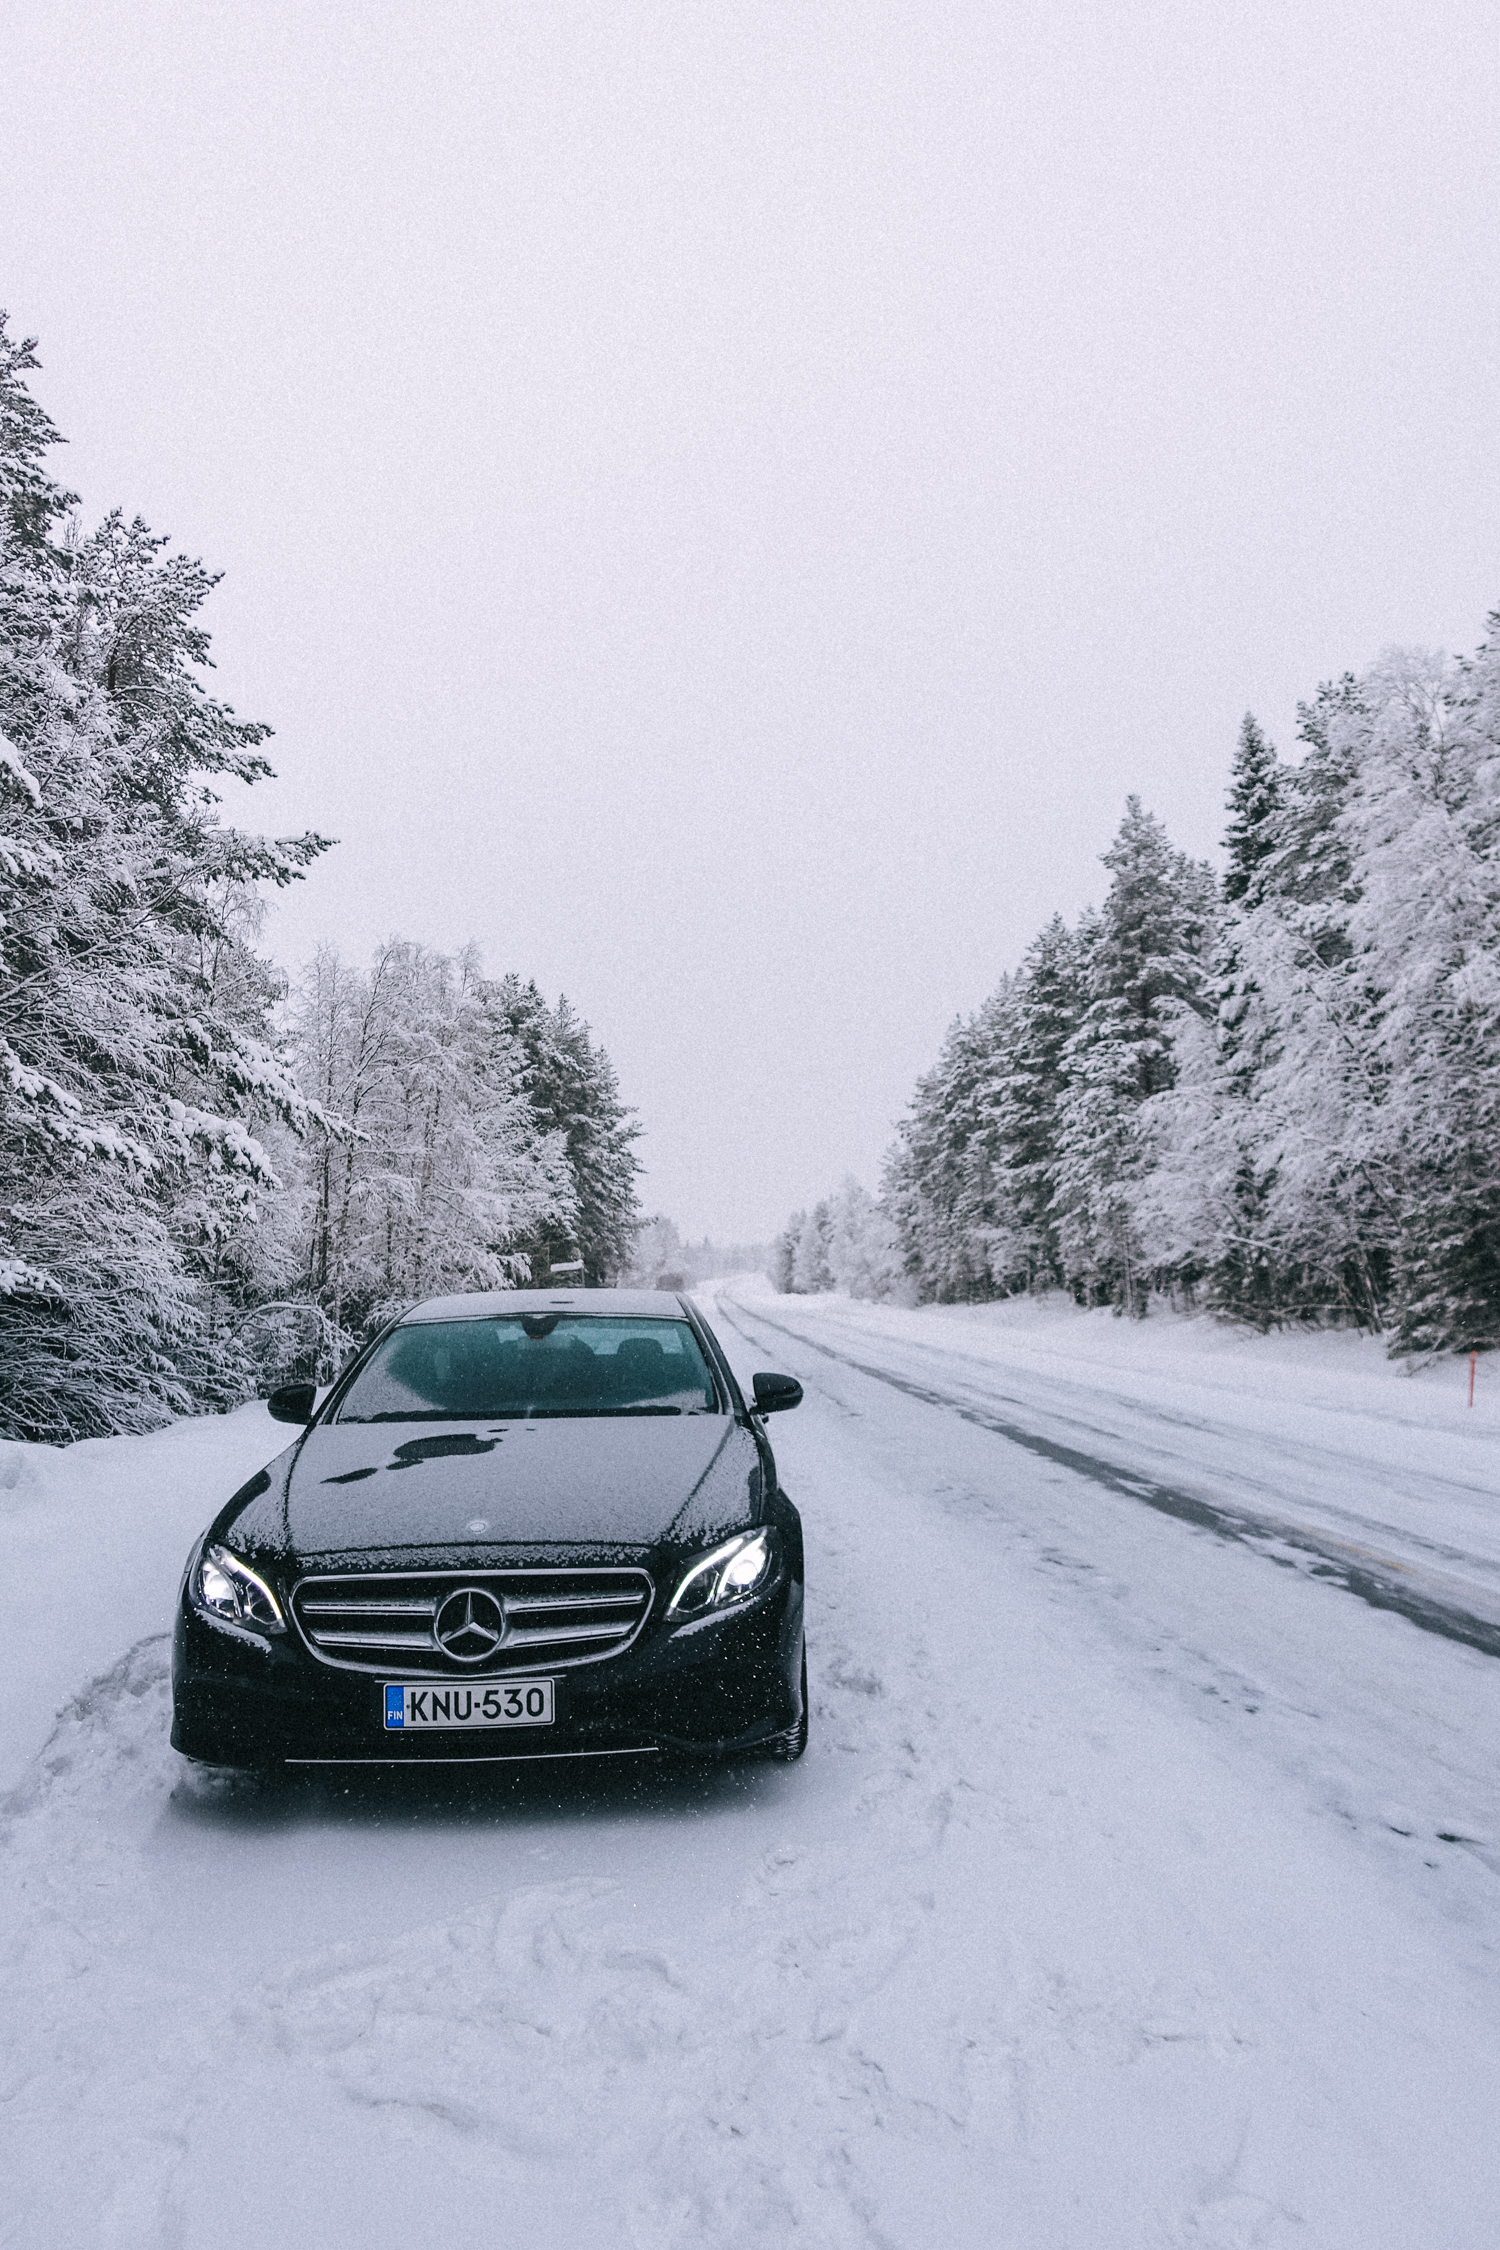 Torrance Coombs and Alyssa Campanella of The A List blog go on a winter road trip in Finland with Sixt